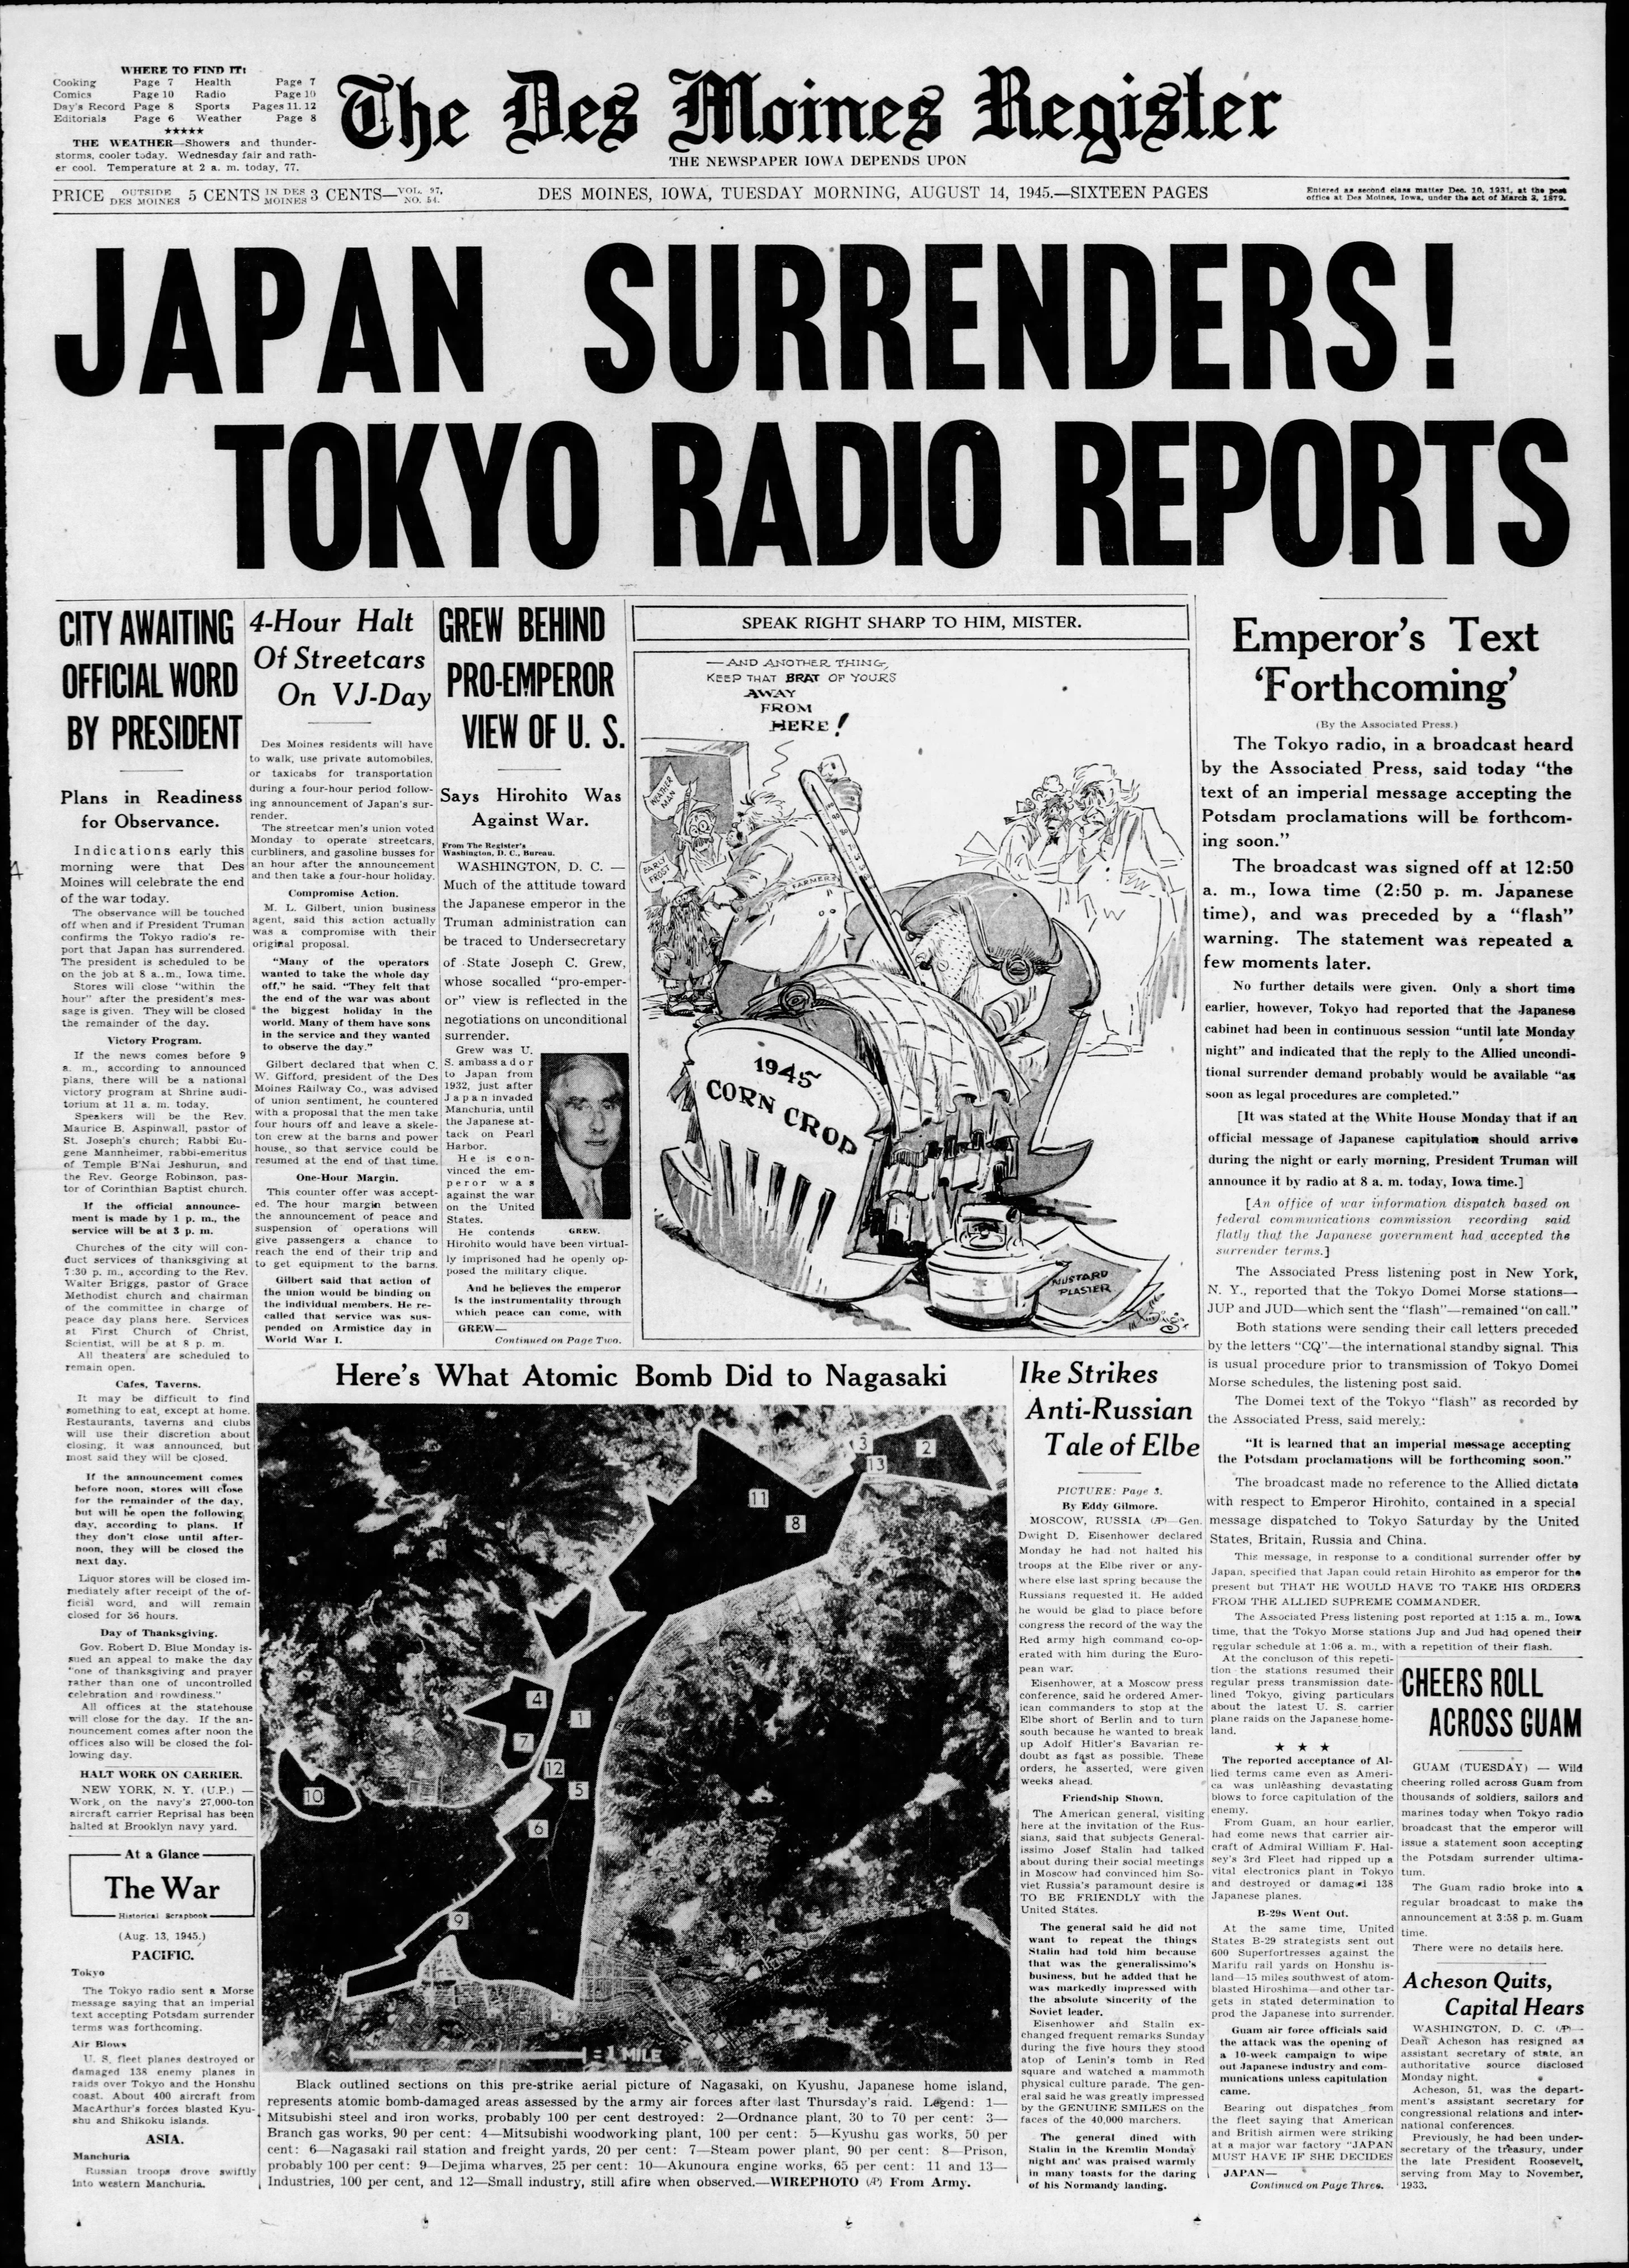 Historic front page from the Des Moines Register, Aug. 14, 1945: Japan surrenders; WWII ends